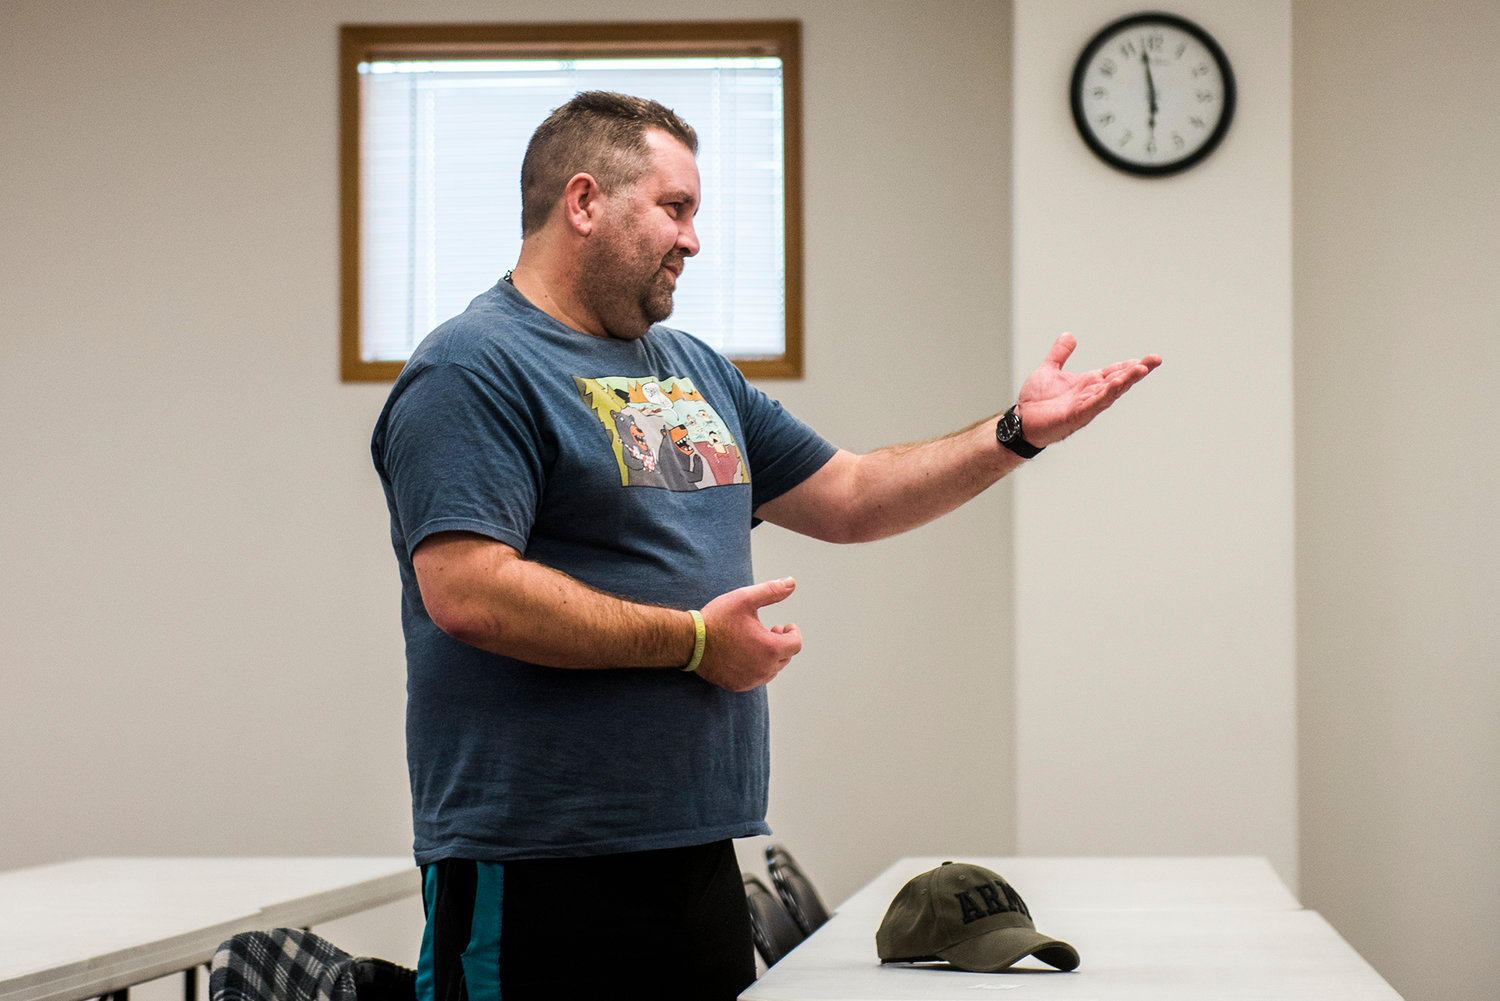 Jay Smiley talks about mental health during a public meeting Monday afternoon at the Chehalis Veterans Memorial Museum.